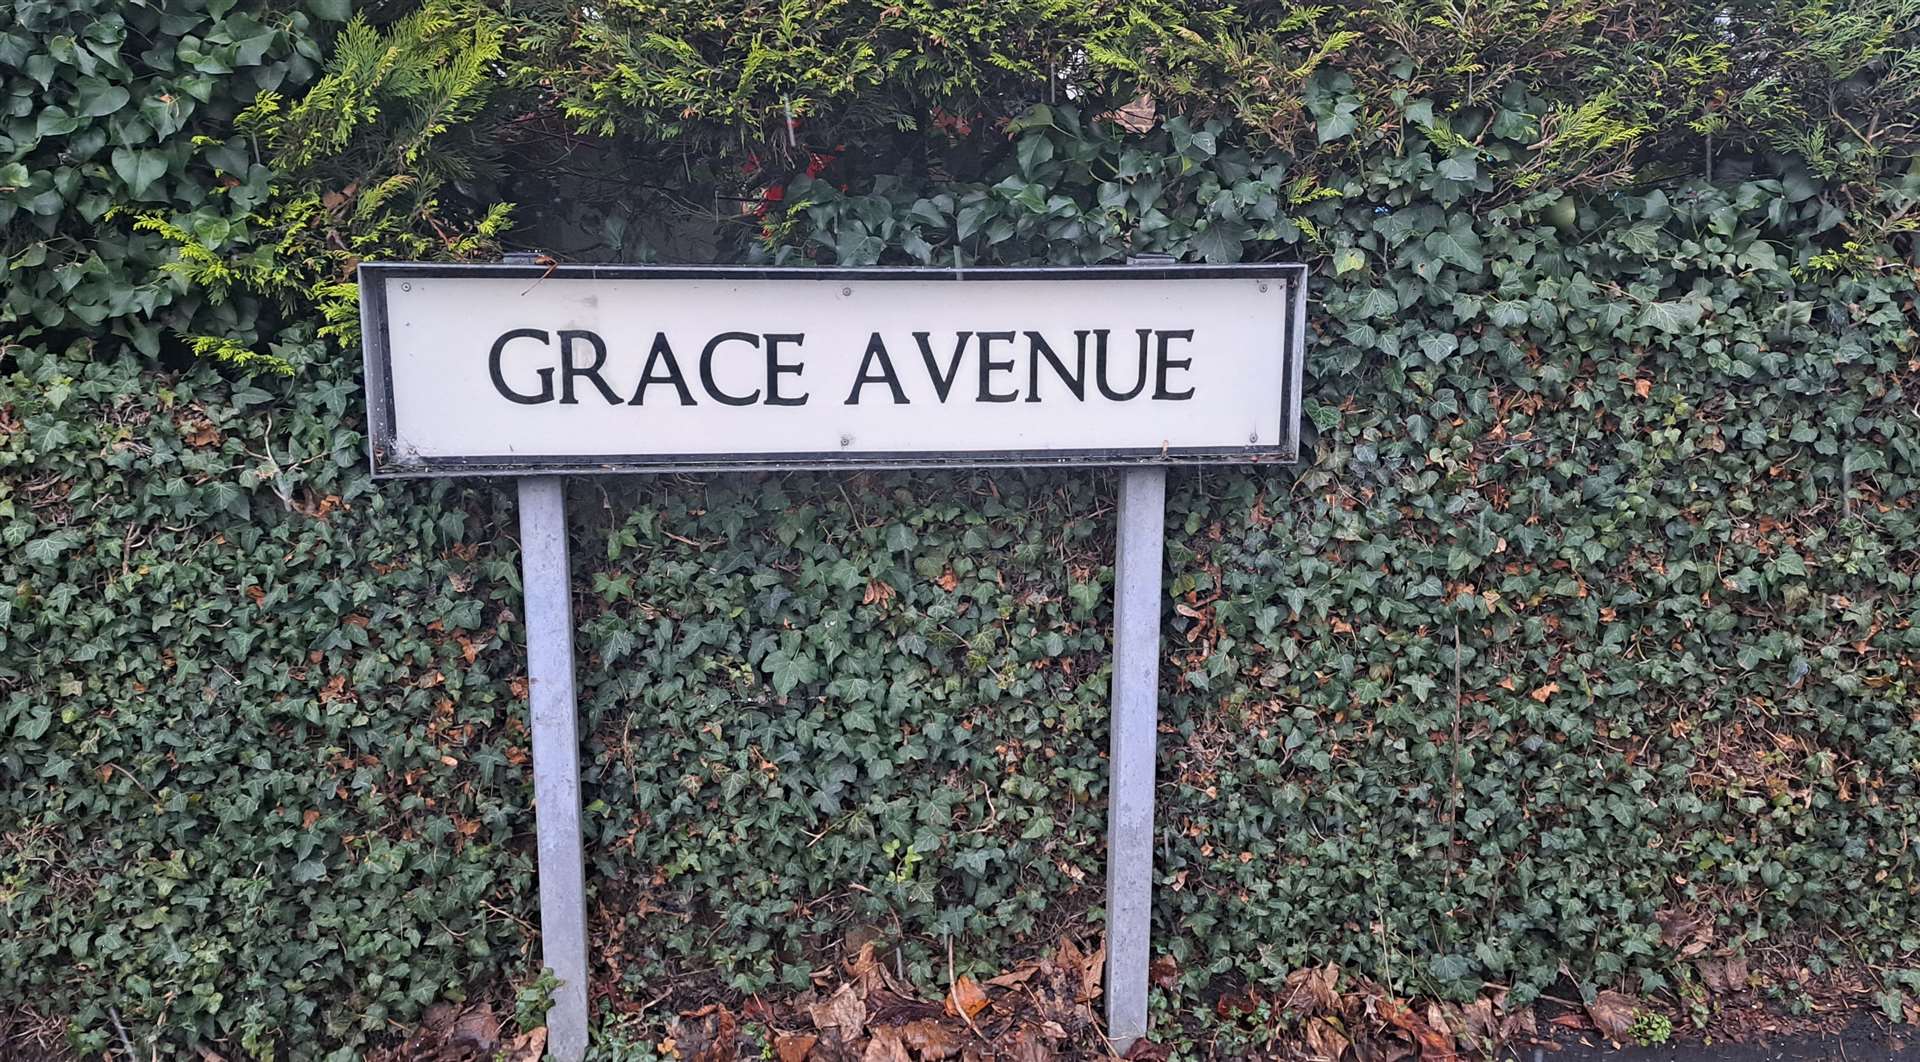 Residents of Grace Avenue say their street is the wrong place for a children's home